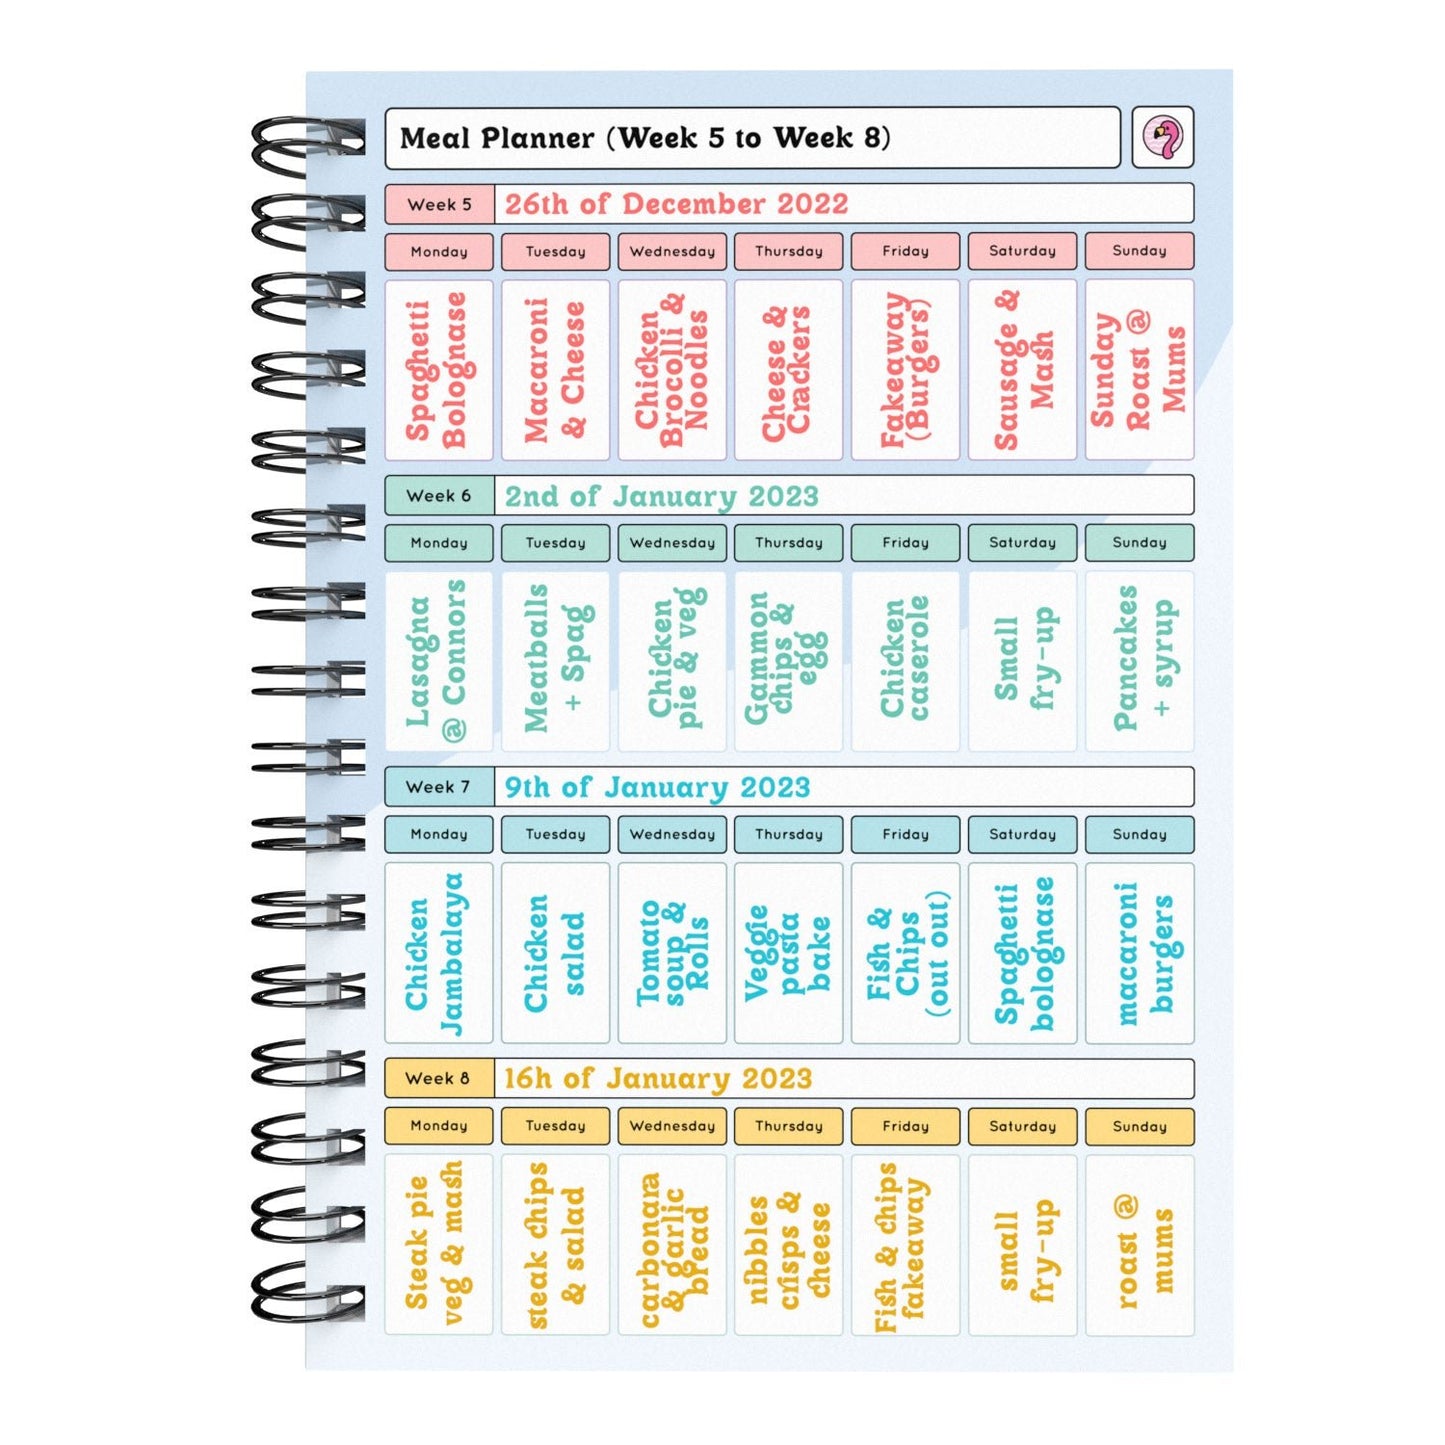 Food Diary - C67 - Calorie Counting - Fabulous Planning - [W] 3MTH - CAL - C67+